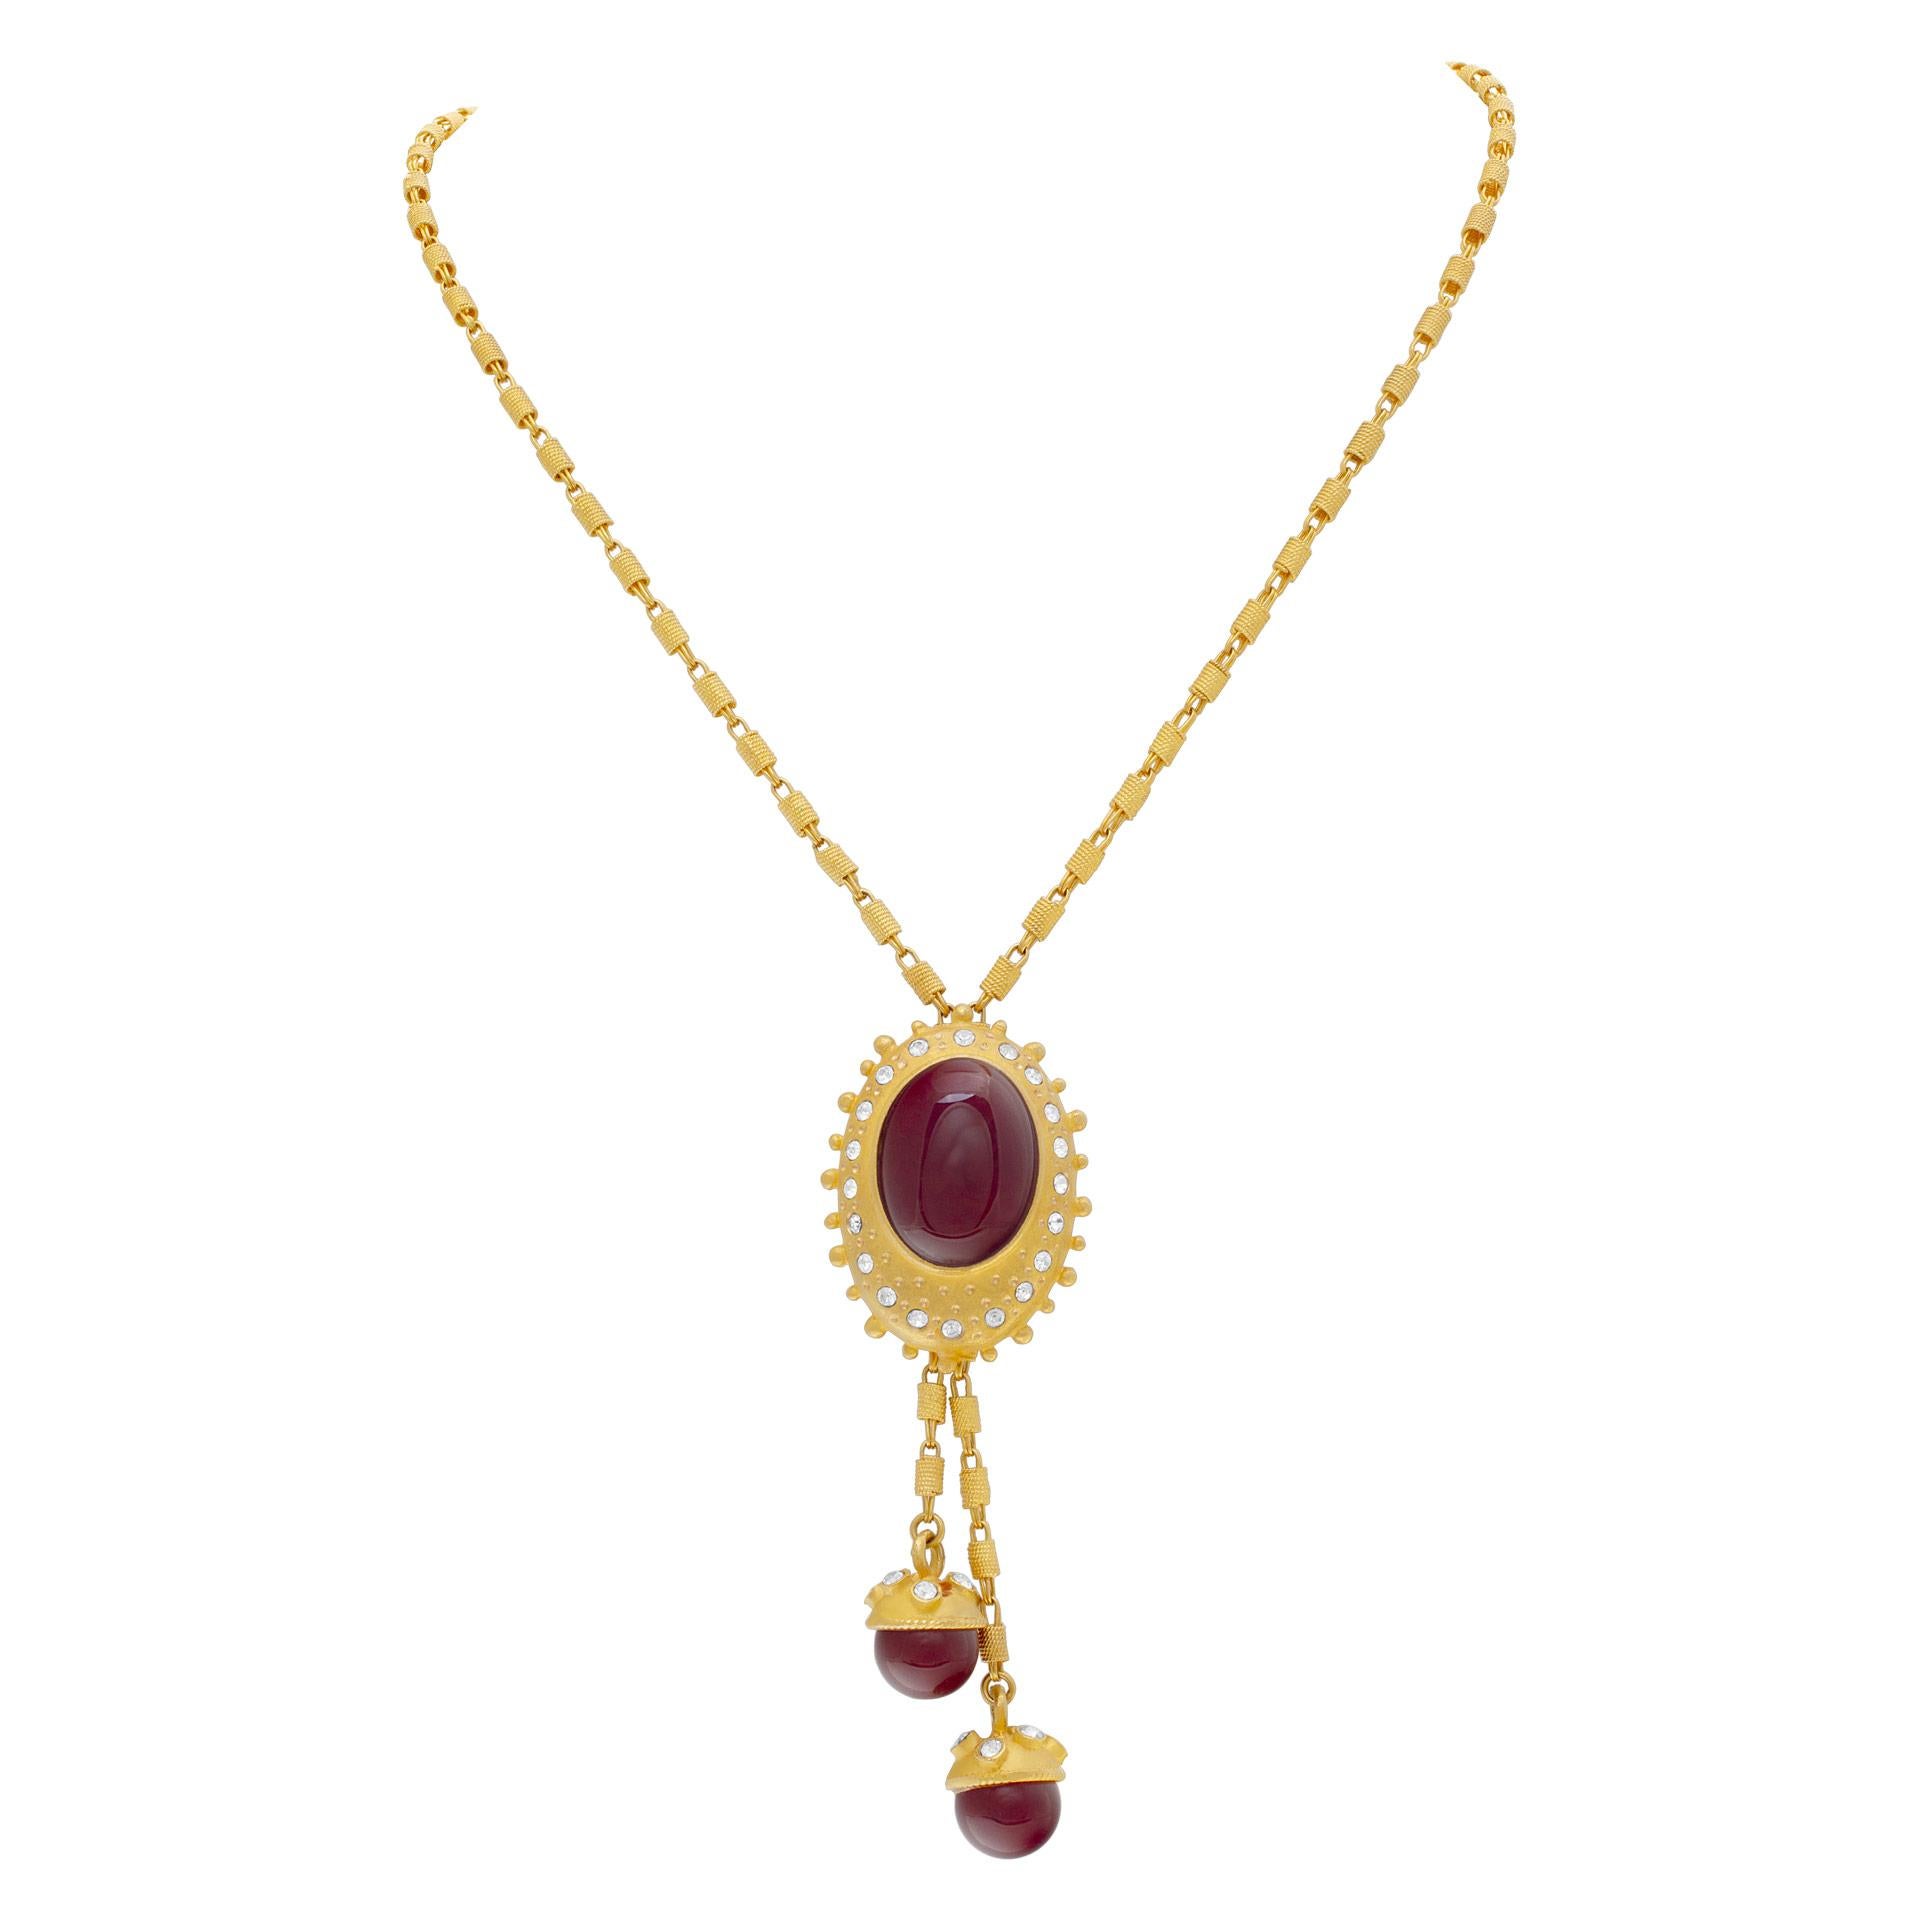 Round Cut Necklace and Earrings Set in 18k with Carnelian & Diamonds